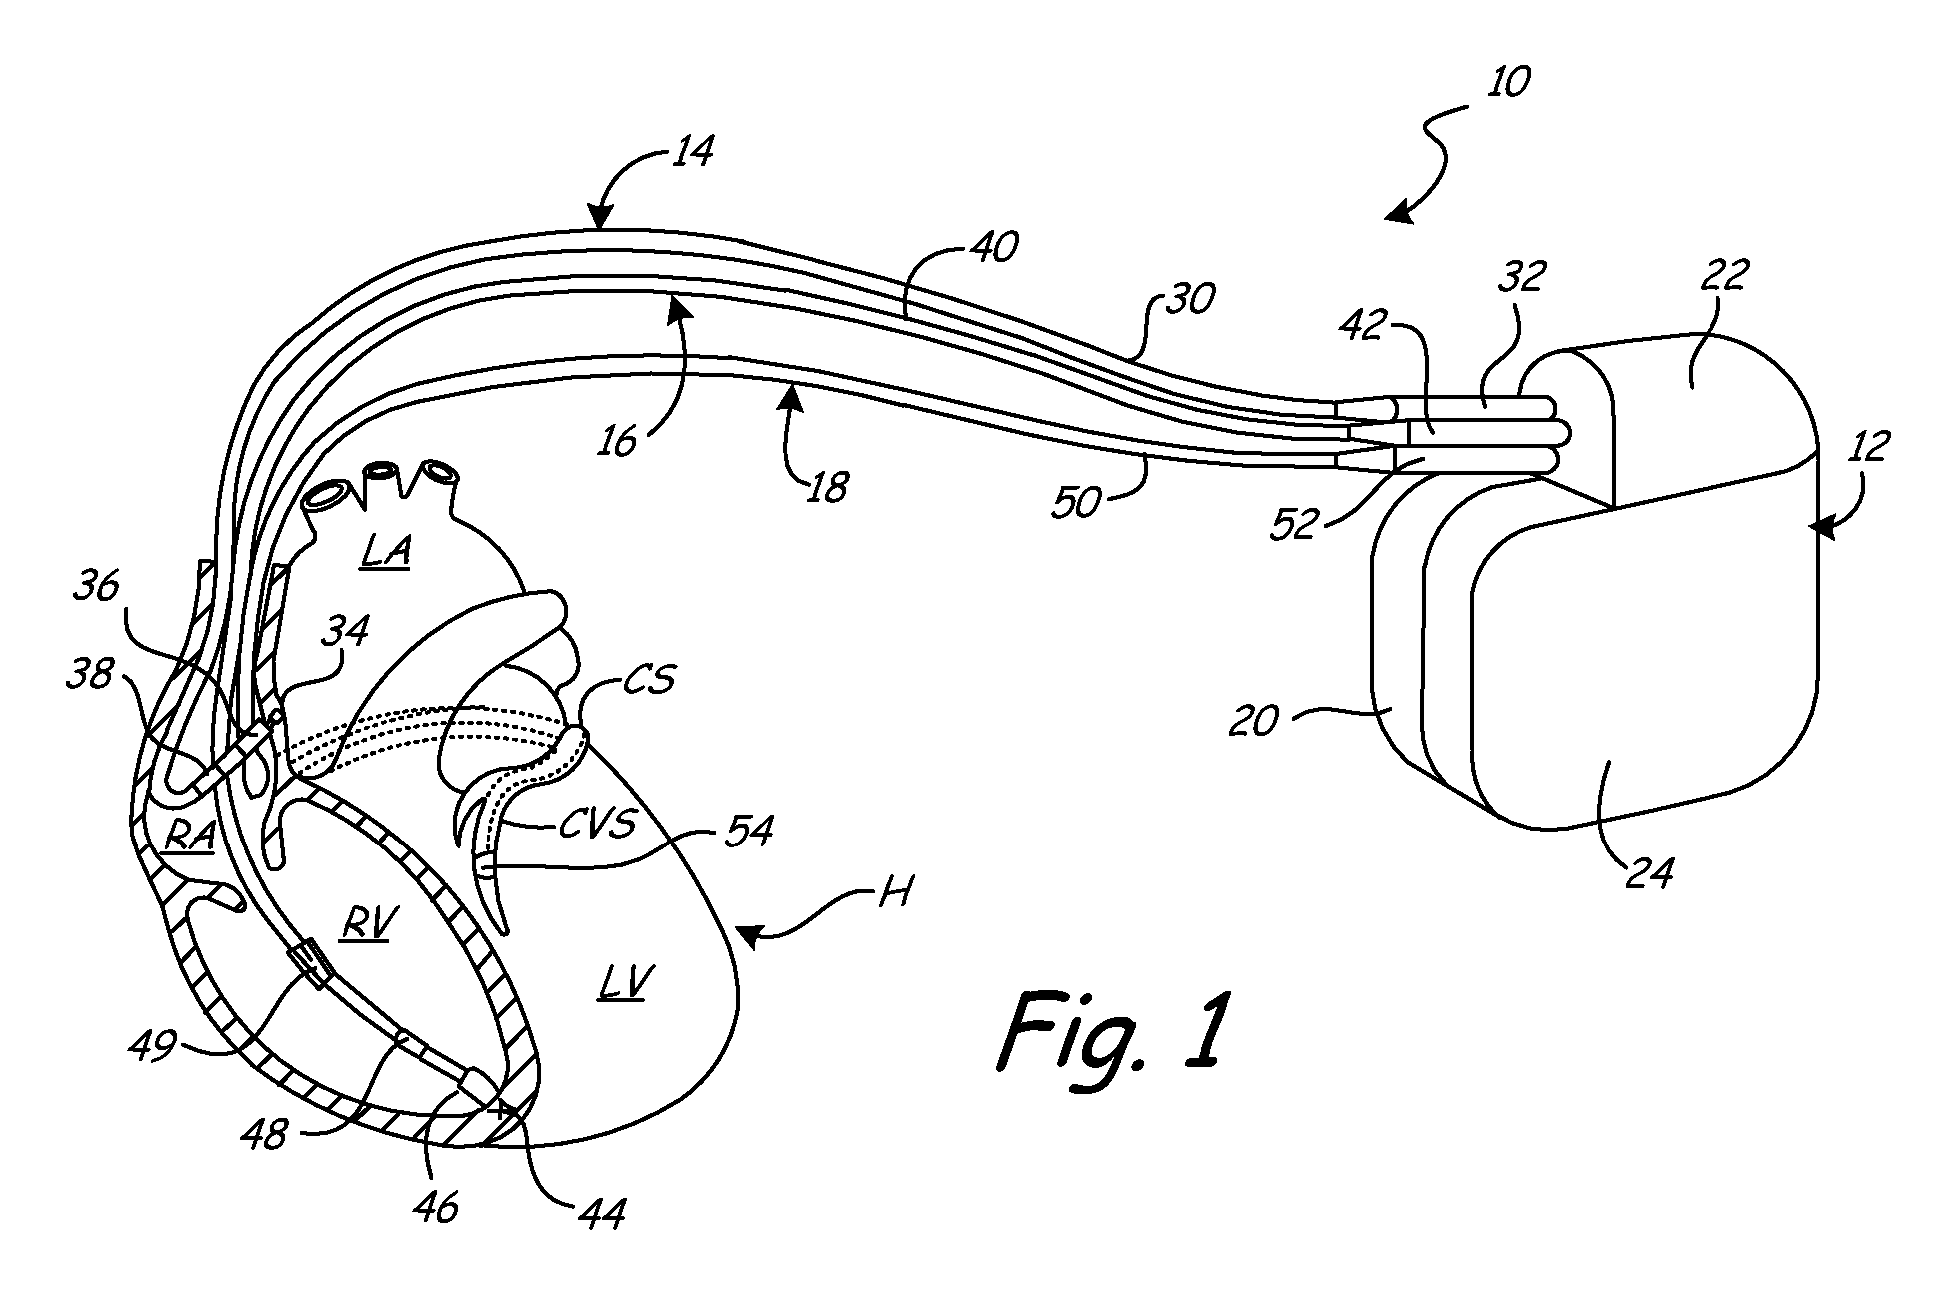 Implantable medical device with electromechanical delay measurement for lead position and ventricular